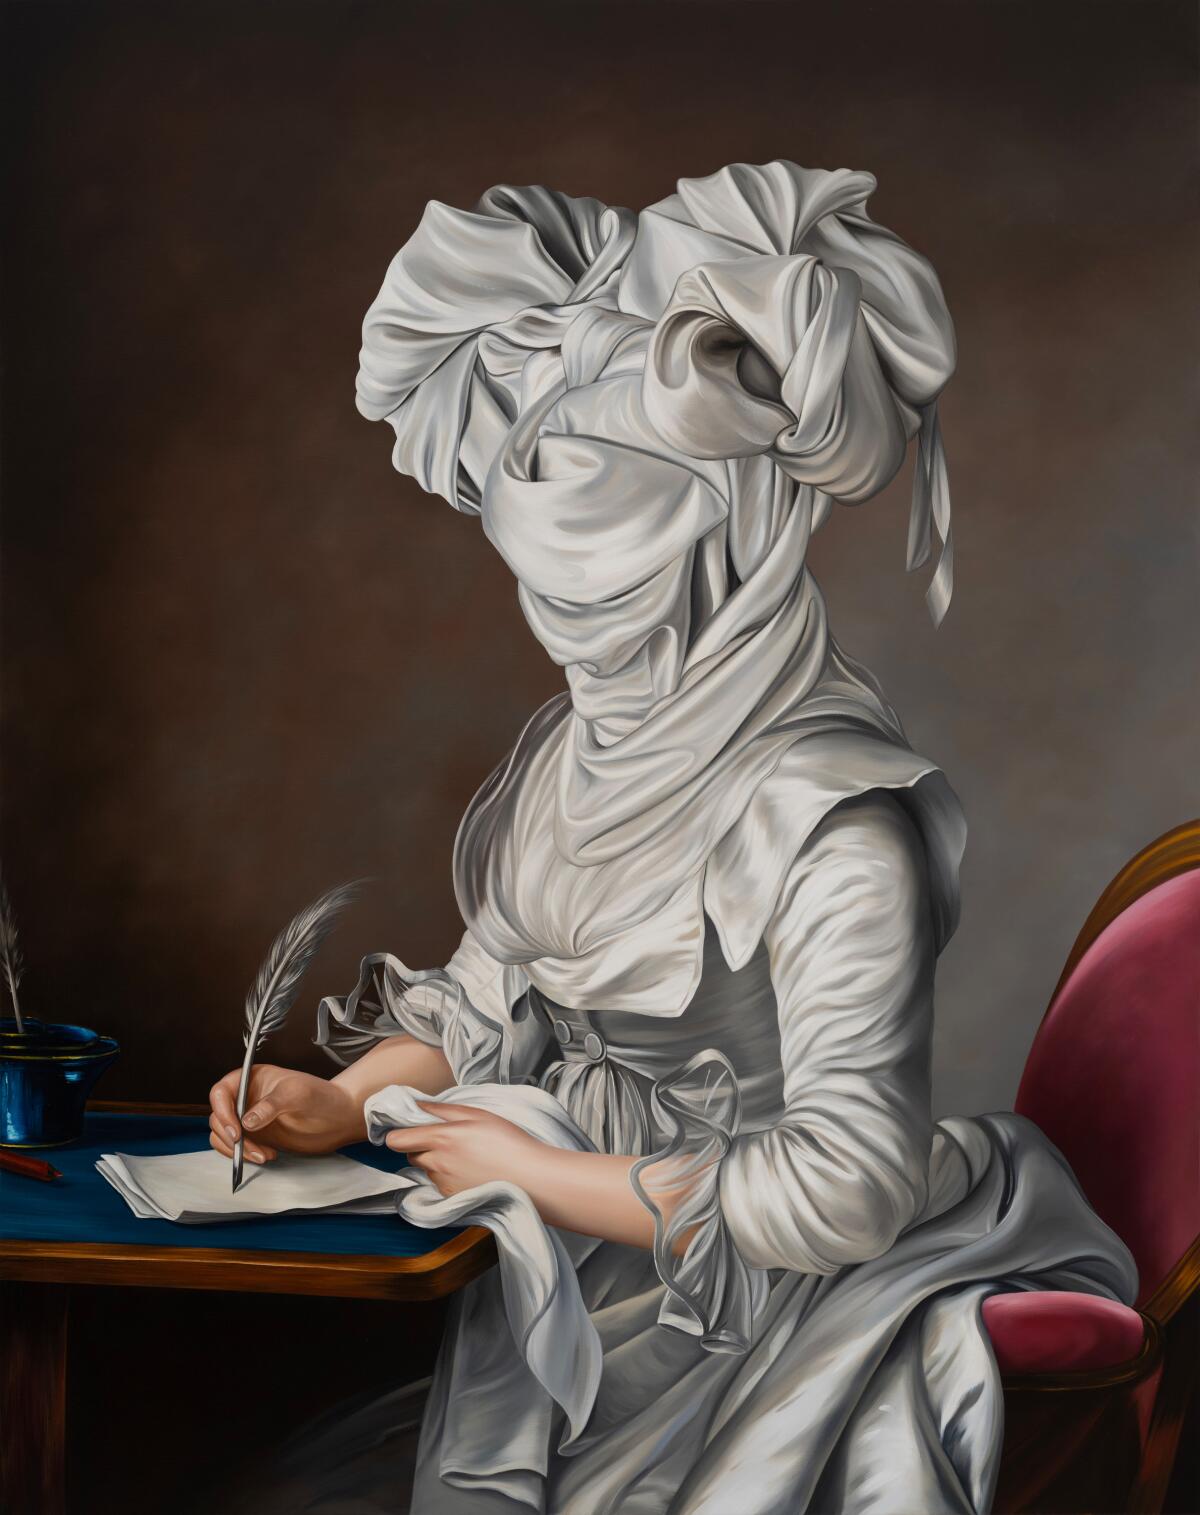 Ewa Juszkiewicz, "The Letter (after Adelaide Labille-Guiard)," 2023. Oil on canvas, 57 1/8 x 45 1/4 in.